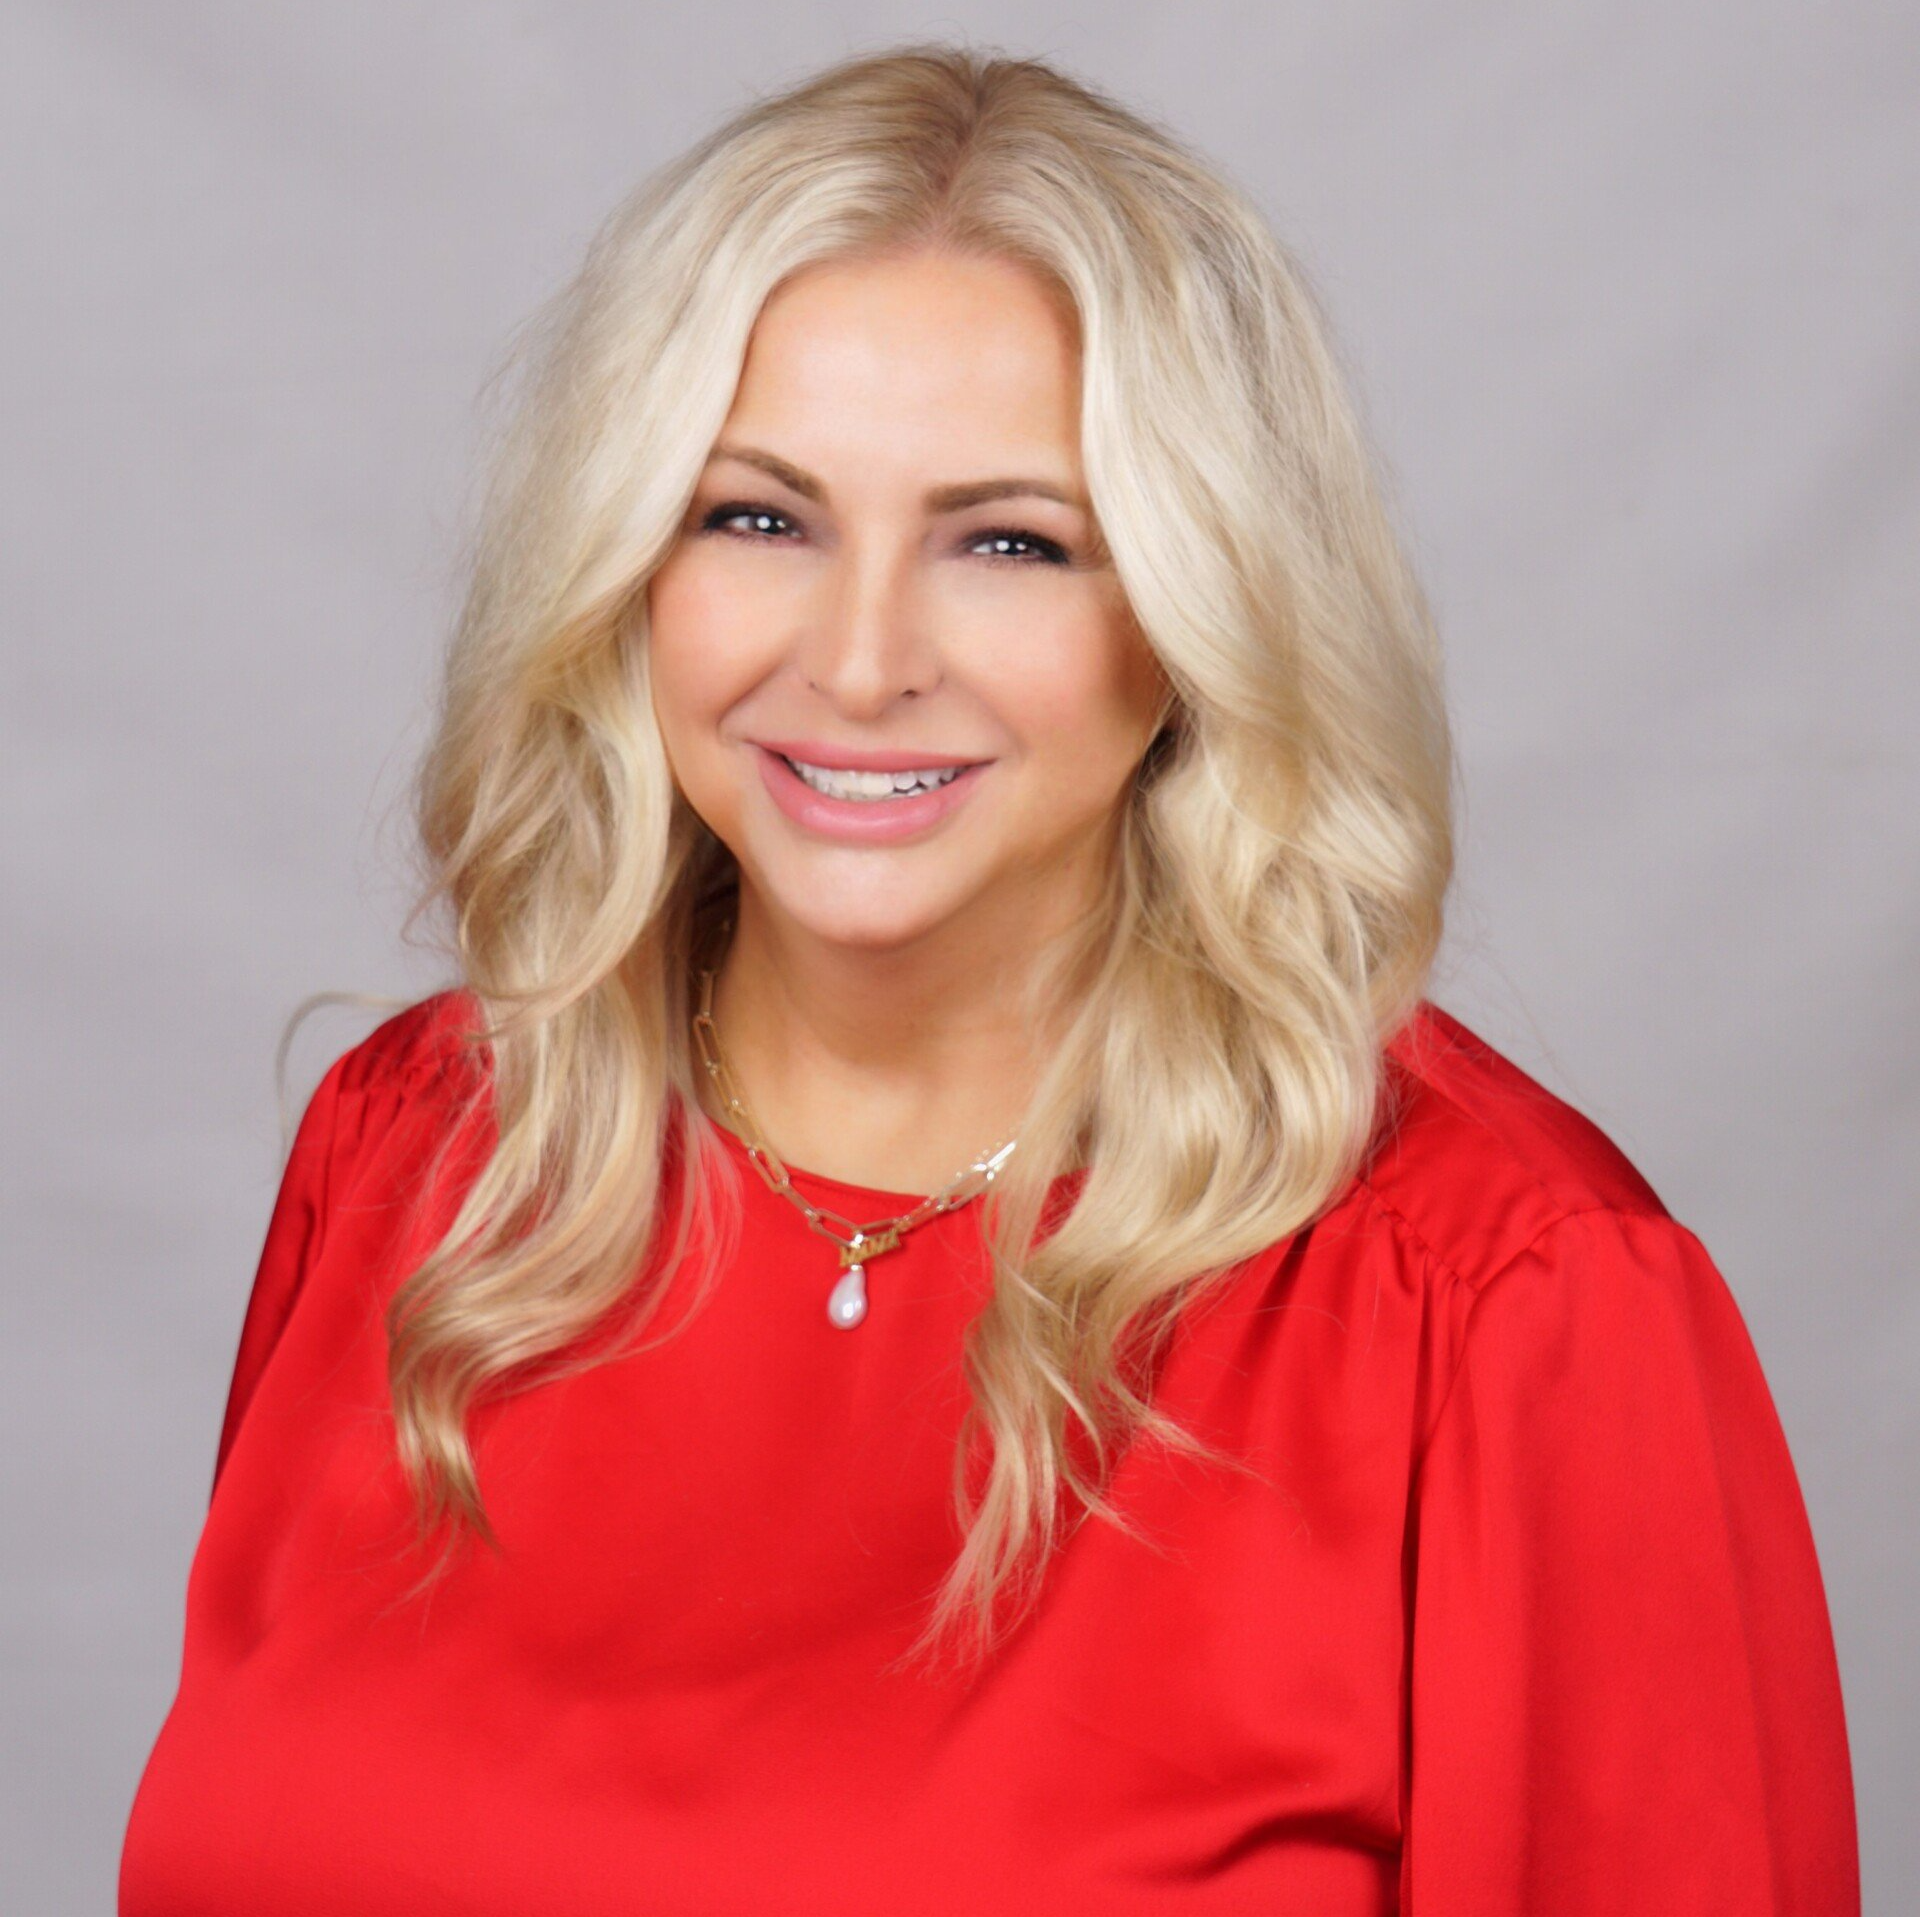 A woman with blonde hair is wearing a red shirt and a necklace.